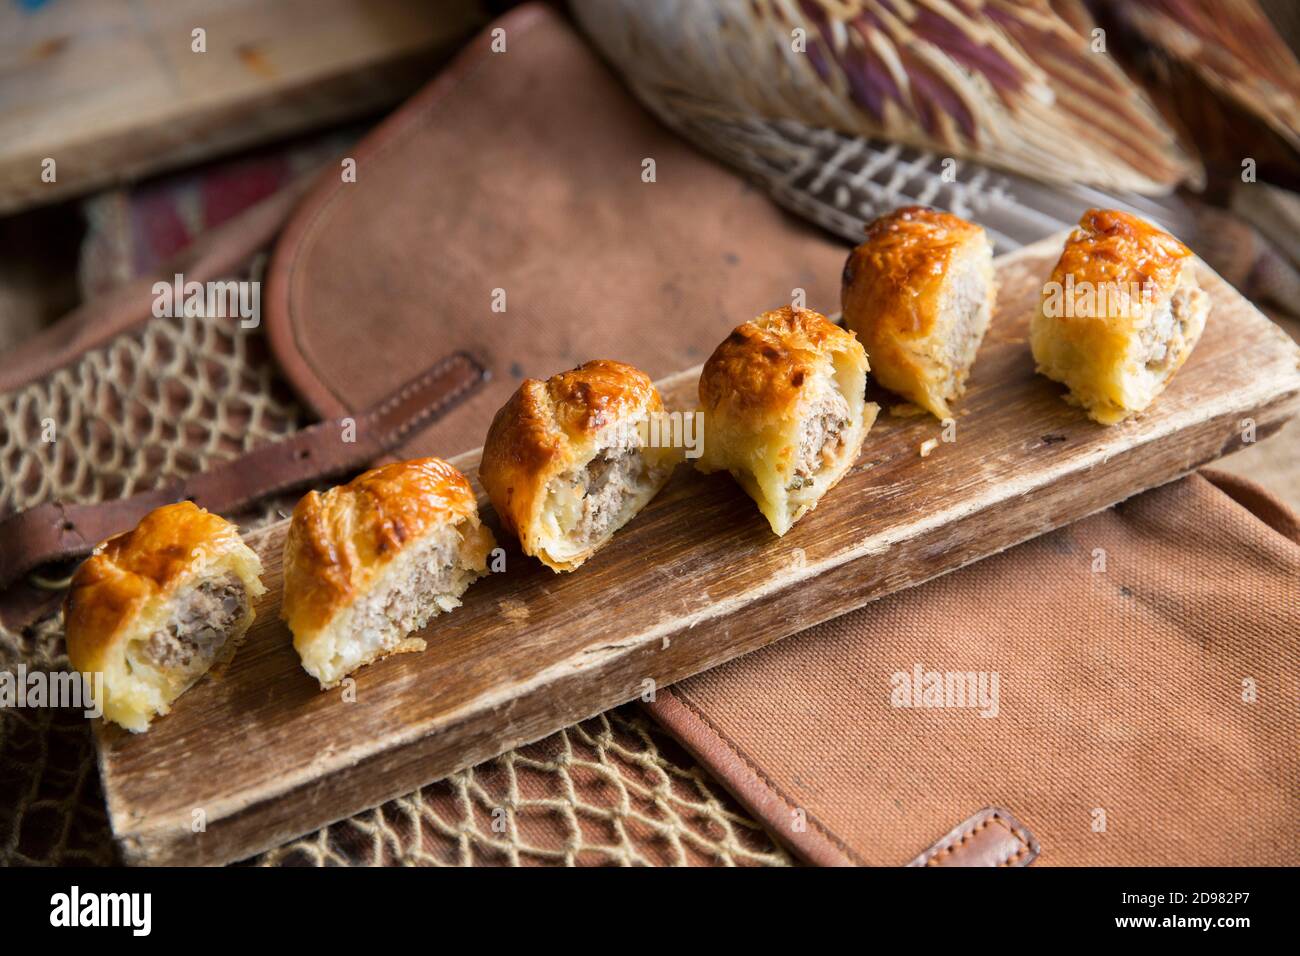 Pheasant sausage rolls made from minced pork and minced pheasant and herbs and spices. Made from a pheasant shot on a small driven shoot using a shotg Stock Photo